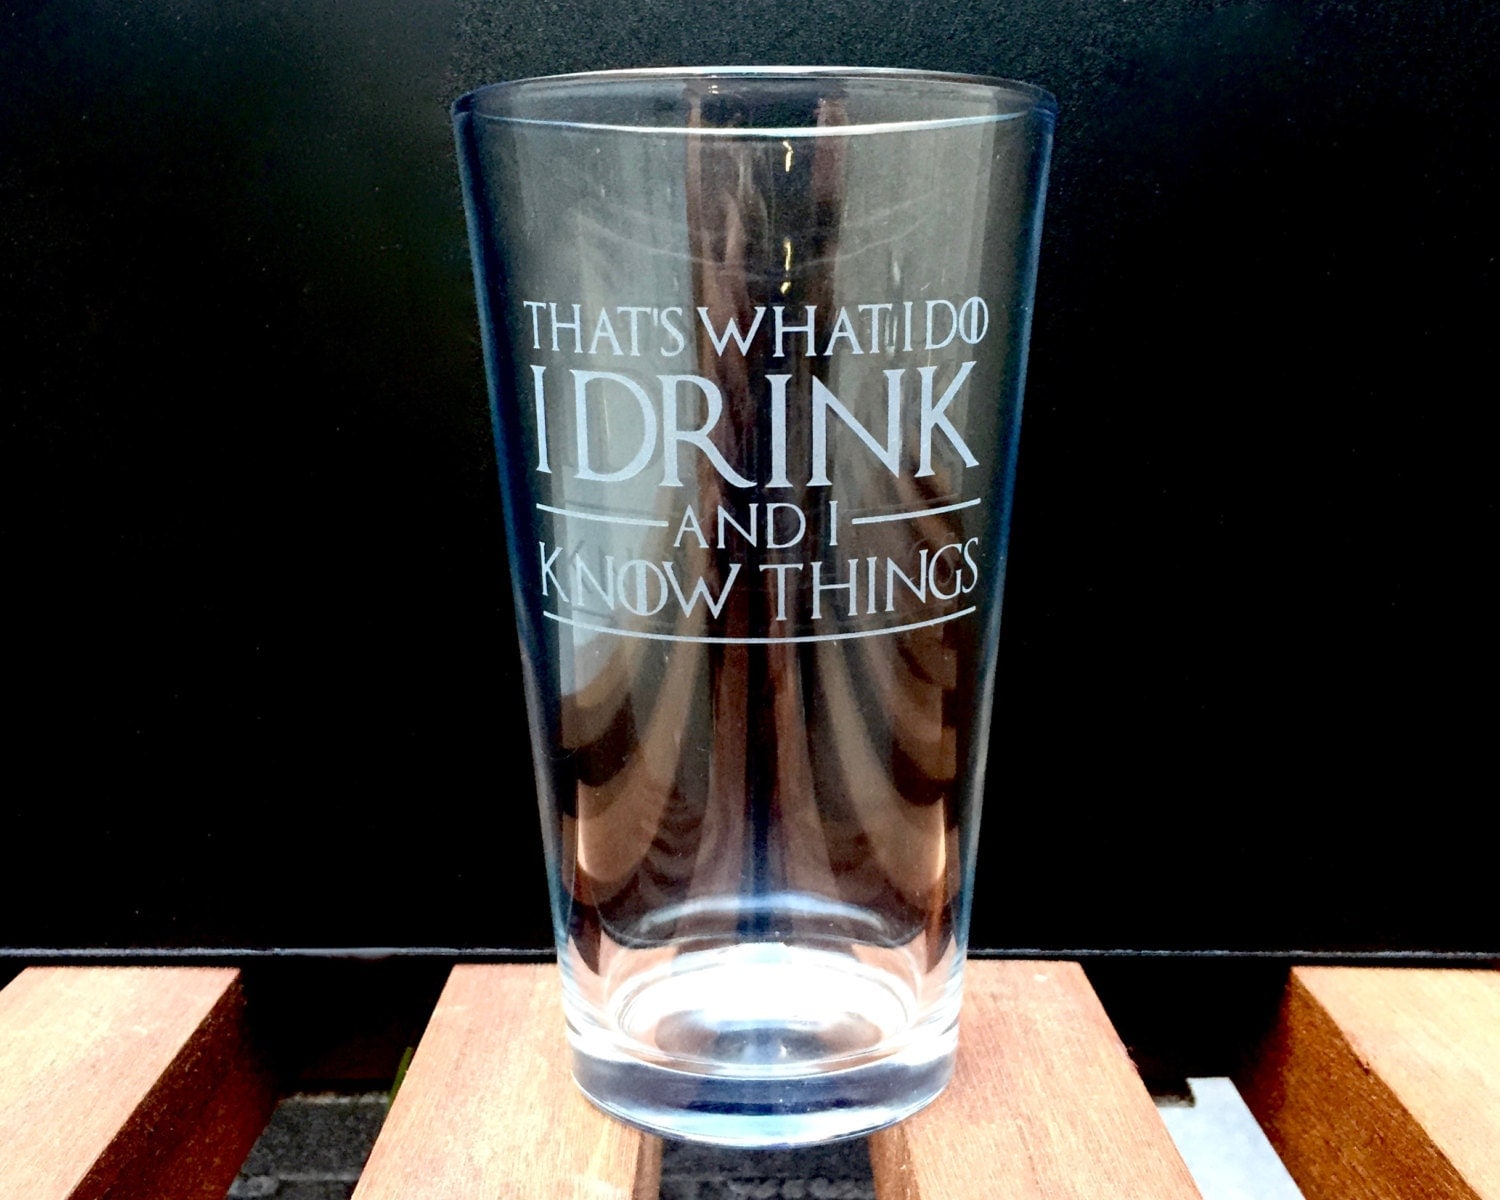 Game of Thrones Pint Glasses Etched Set of 4 - Quotes, I Drink and I Know things, King in the North, Winter is Coming, Mother of Dragons